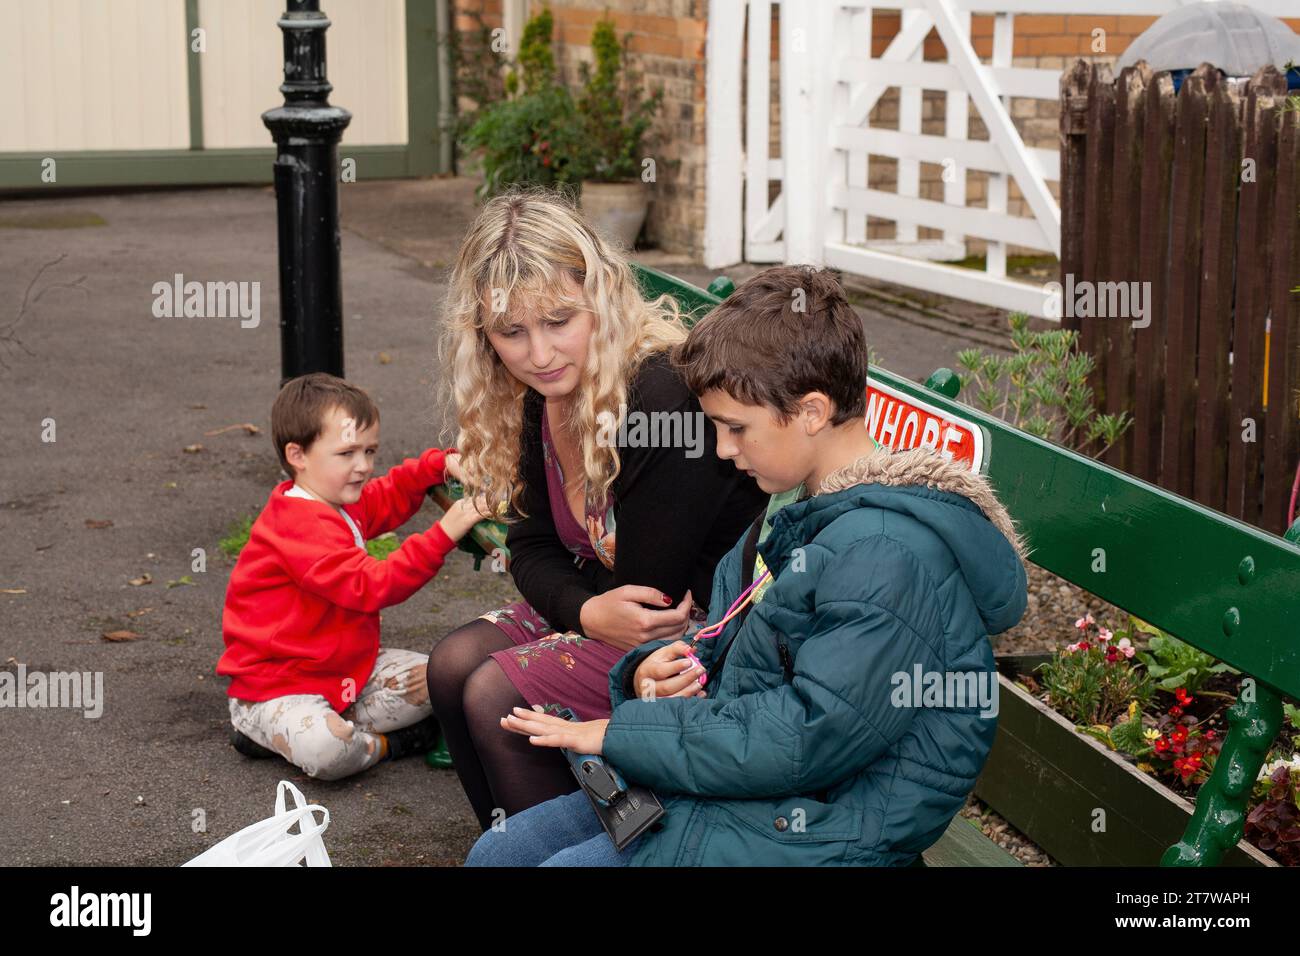 Family Bonding at the Heritage Station: A picturesque scene at a traditional English heritage station as a young mother engages in with children Stock Photo